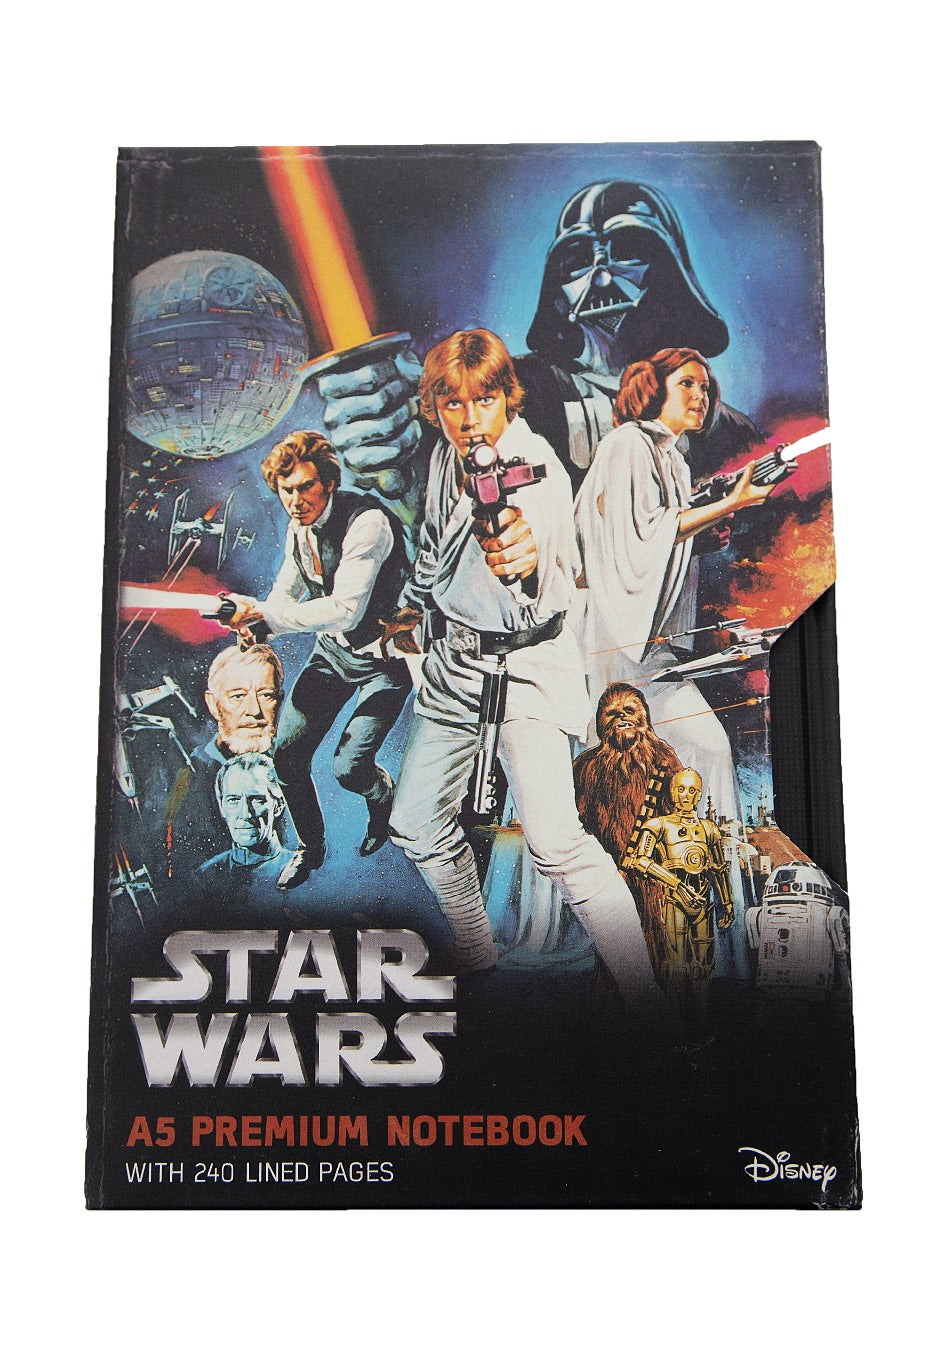 Star Wars - A New Hope VHS - Notebook